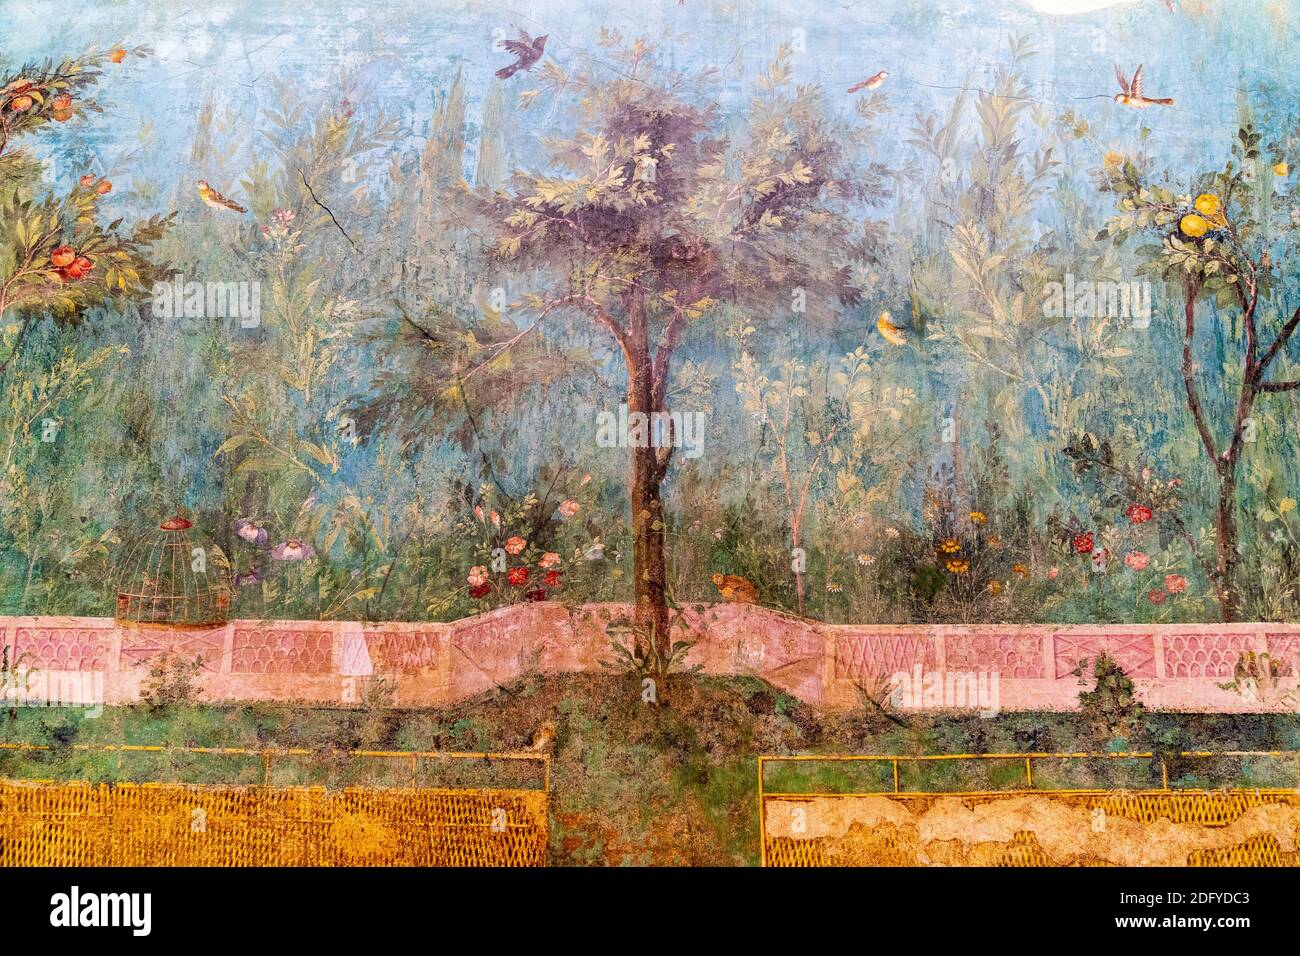 Roman art. The garden painting from Livia's Villa, showing various birds, fruit trees, walls and lawn at the Roman National Museum, Palazzo Massimo. Stock Photo